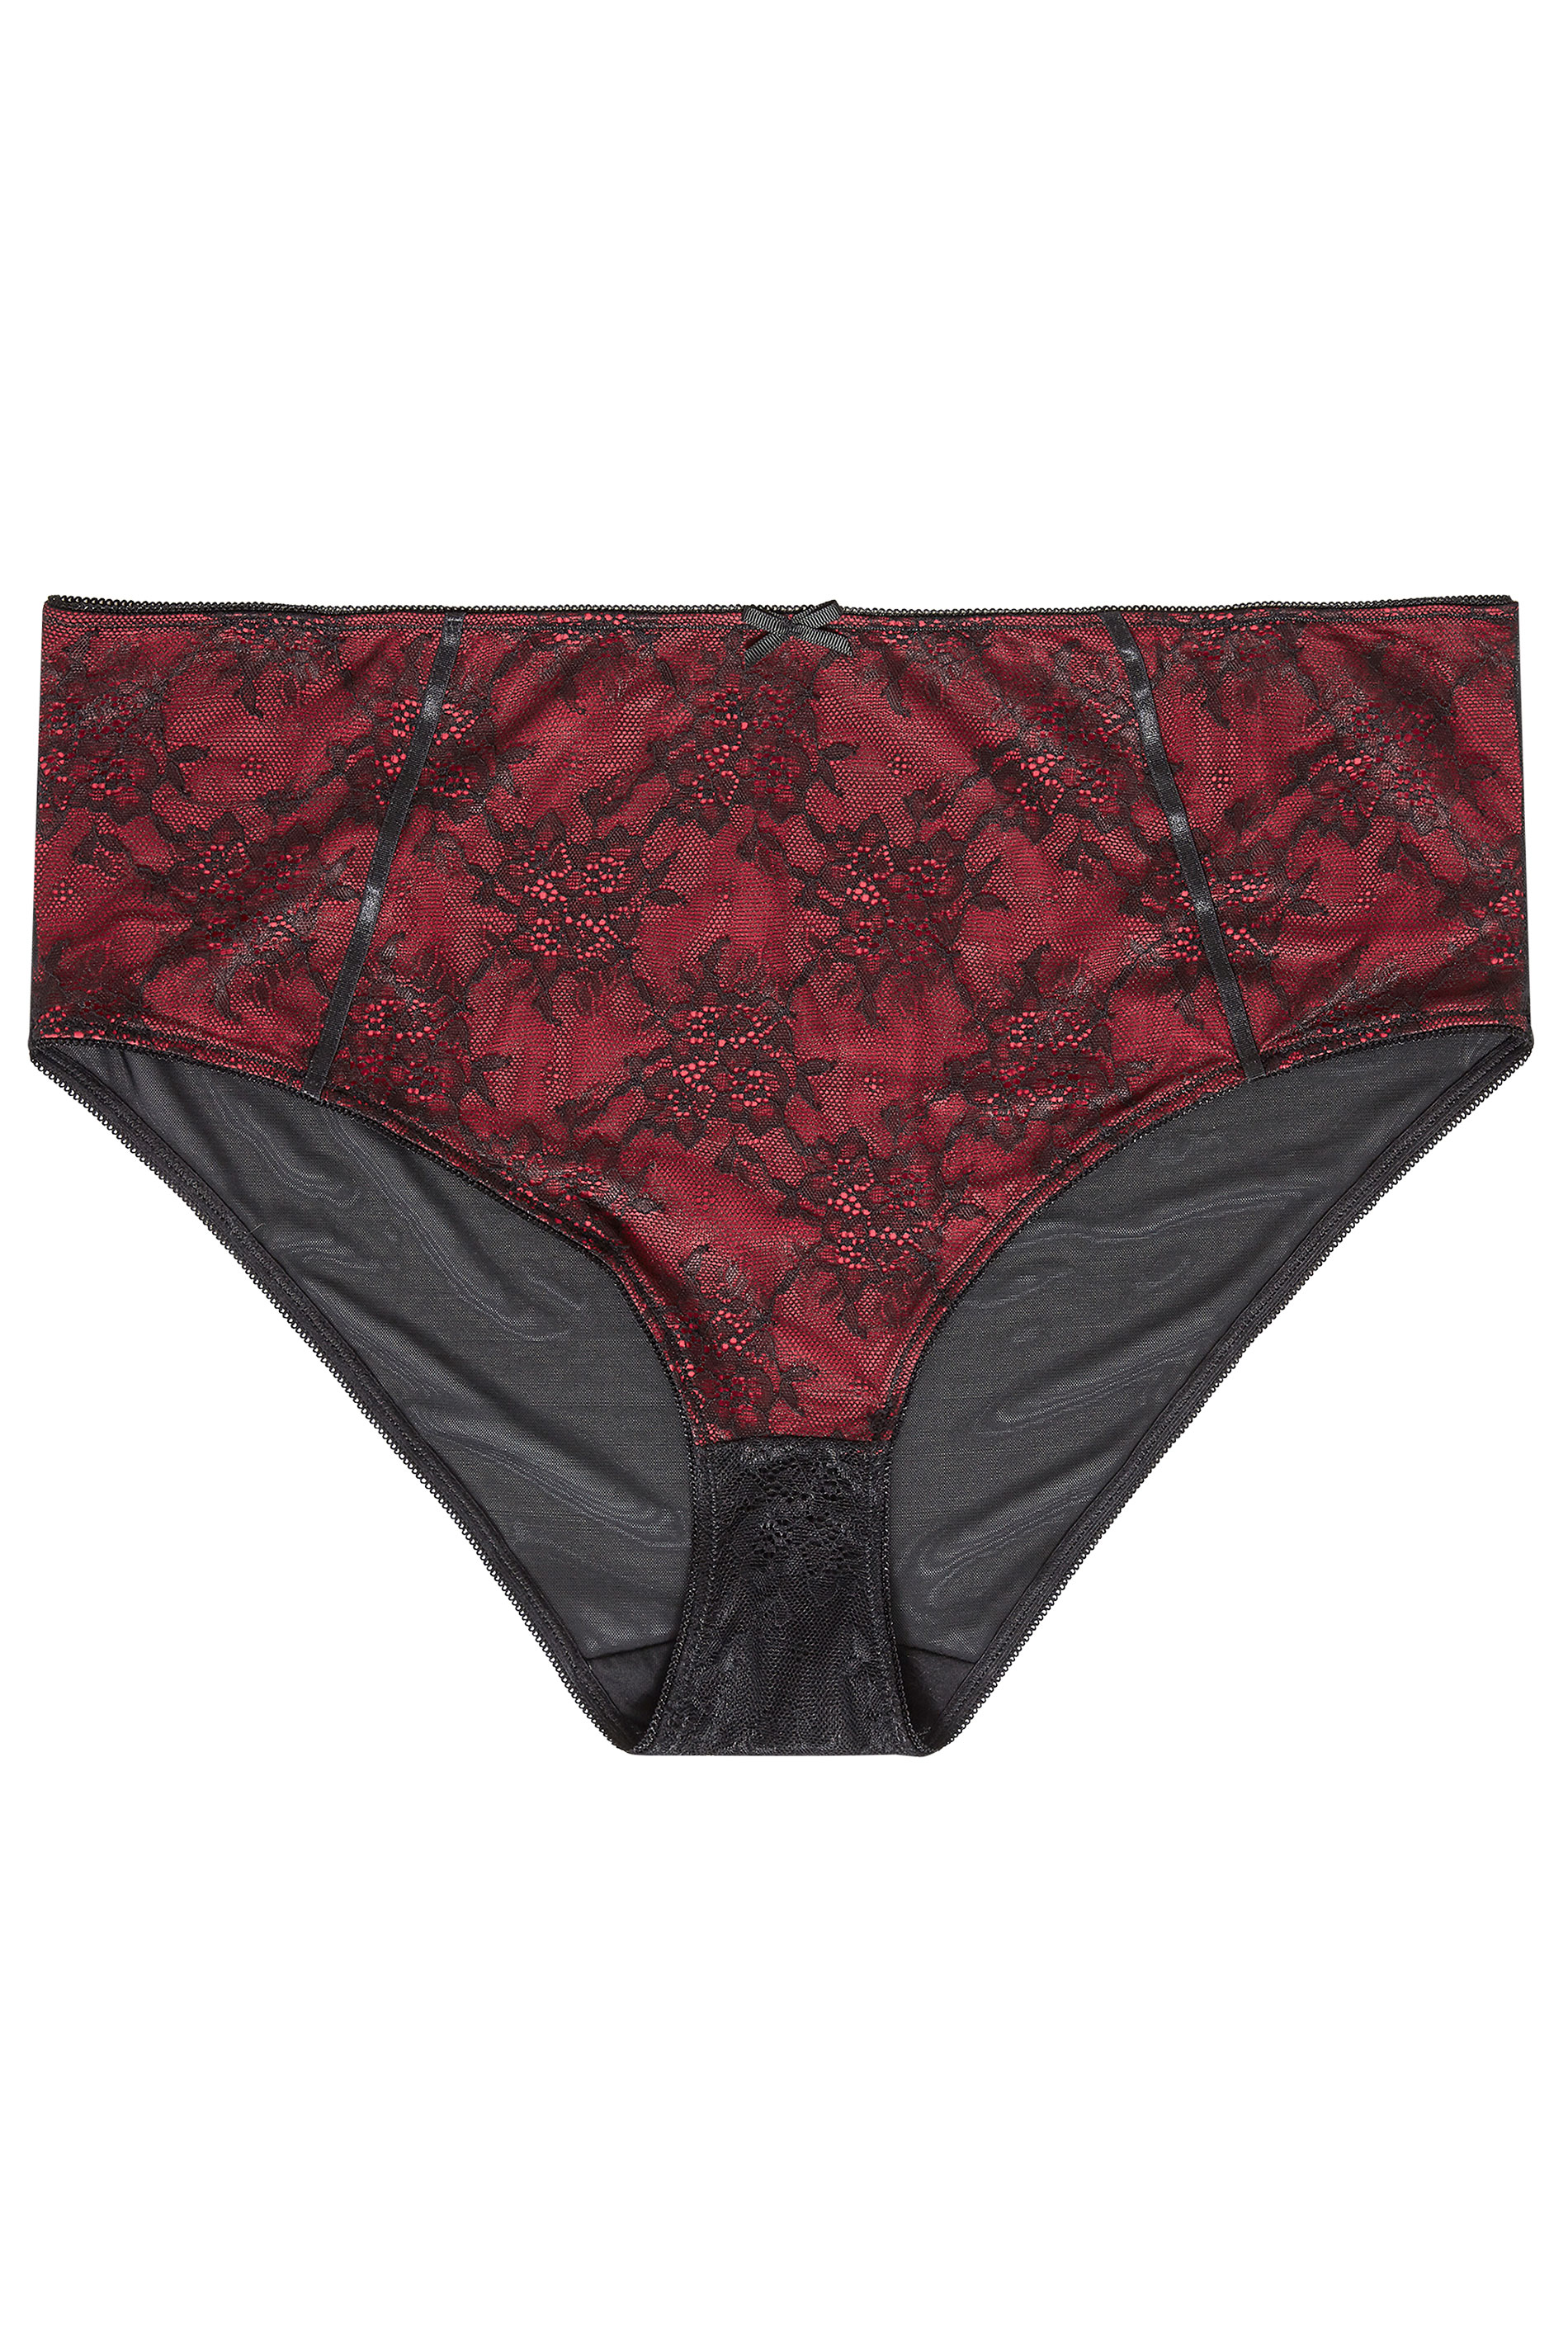 Black & Red Lace High Leg Brief | Yours Clothing 3